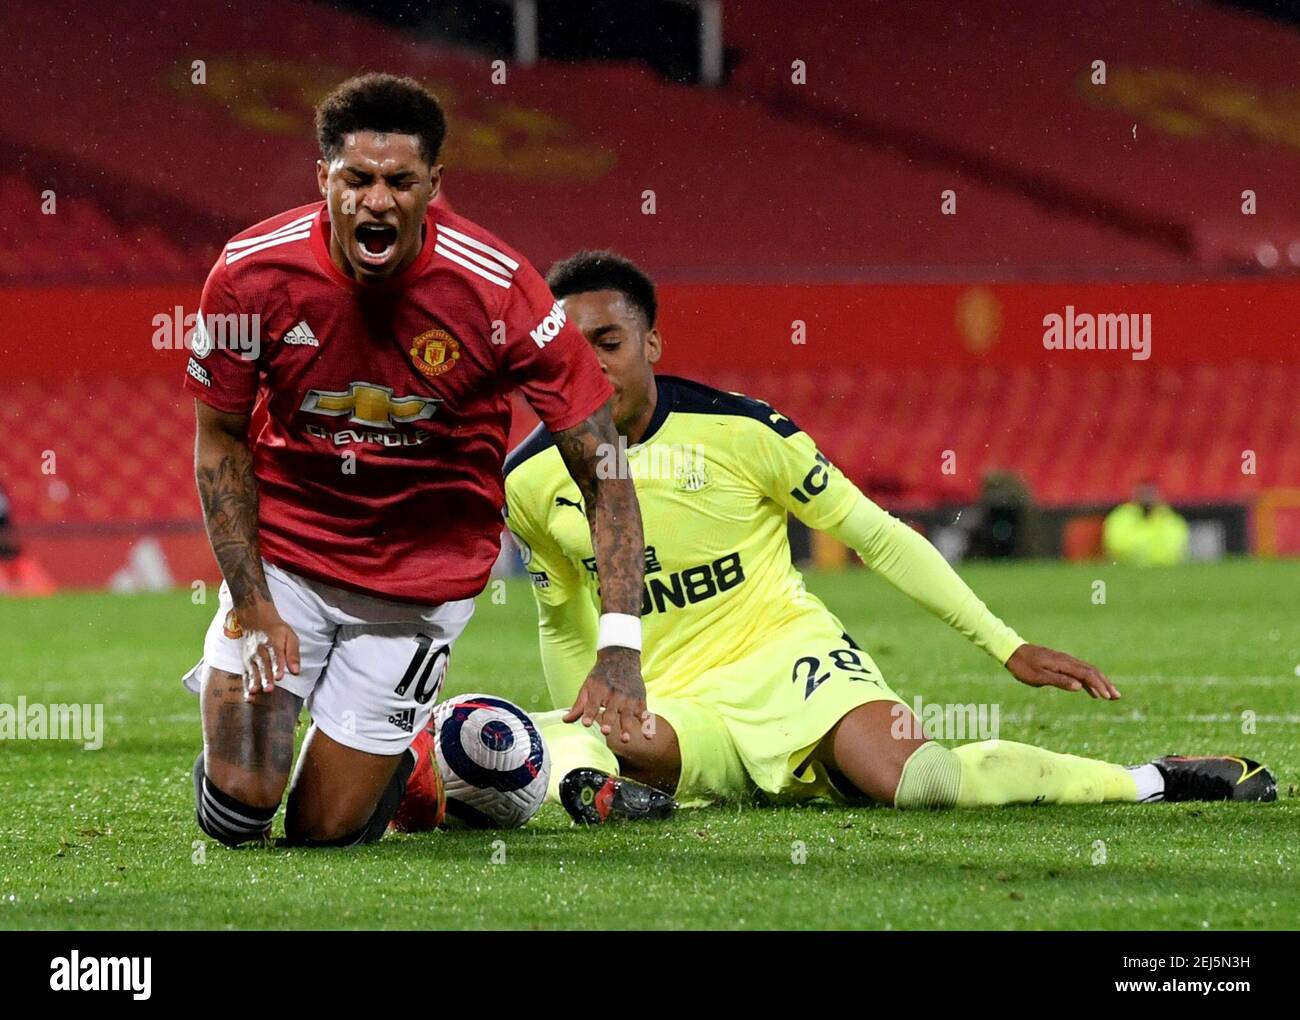 Newcastle United's Joe Willock (right) fouls Manchester United's Marcus Rashford resulting in a penalty during the Premier League match at Old Trafford, Manchester. Picture date: Sunday February 21, 2021. Stock Photo